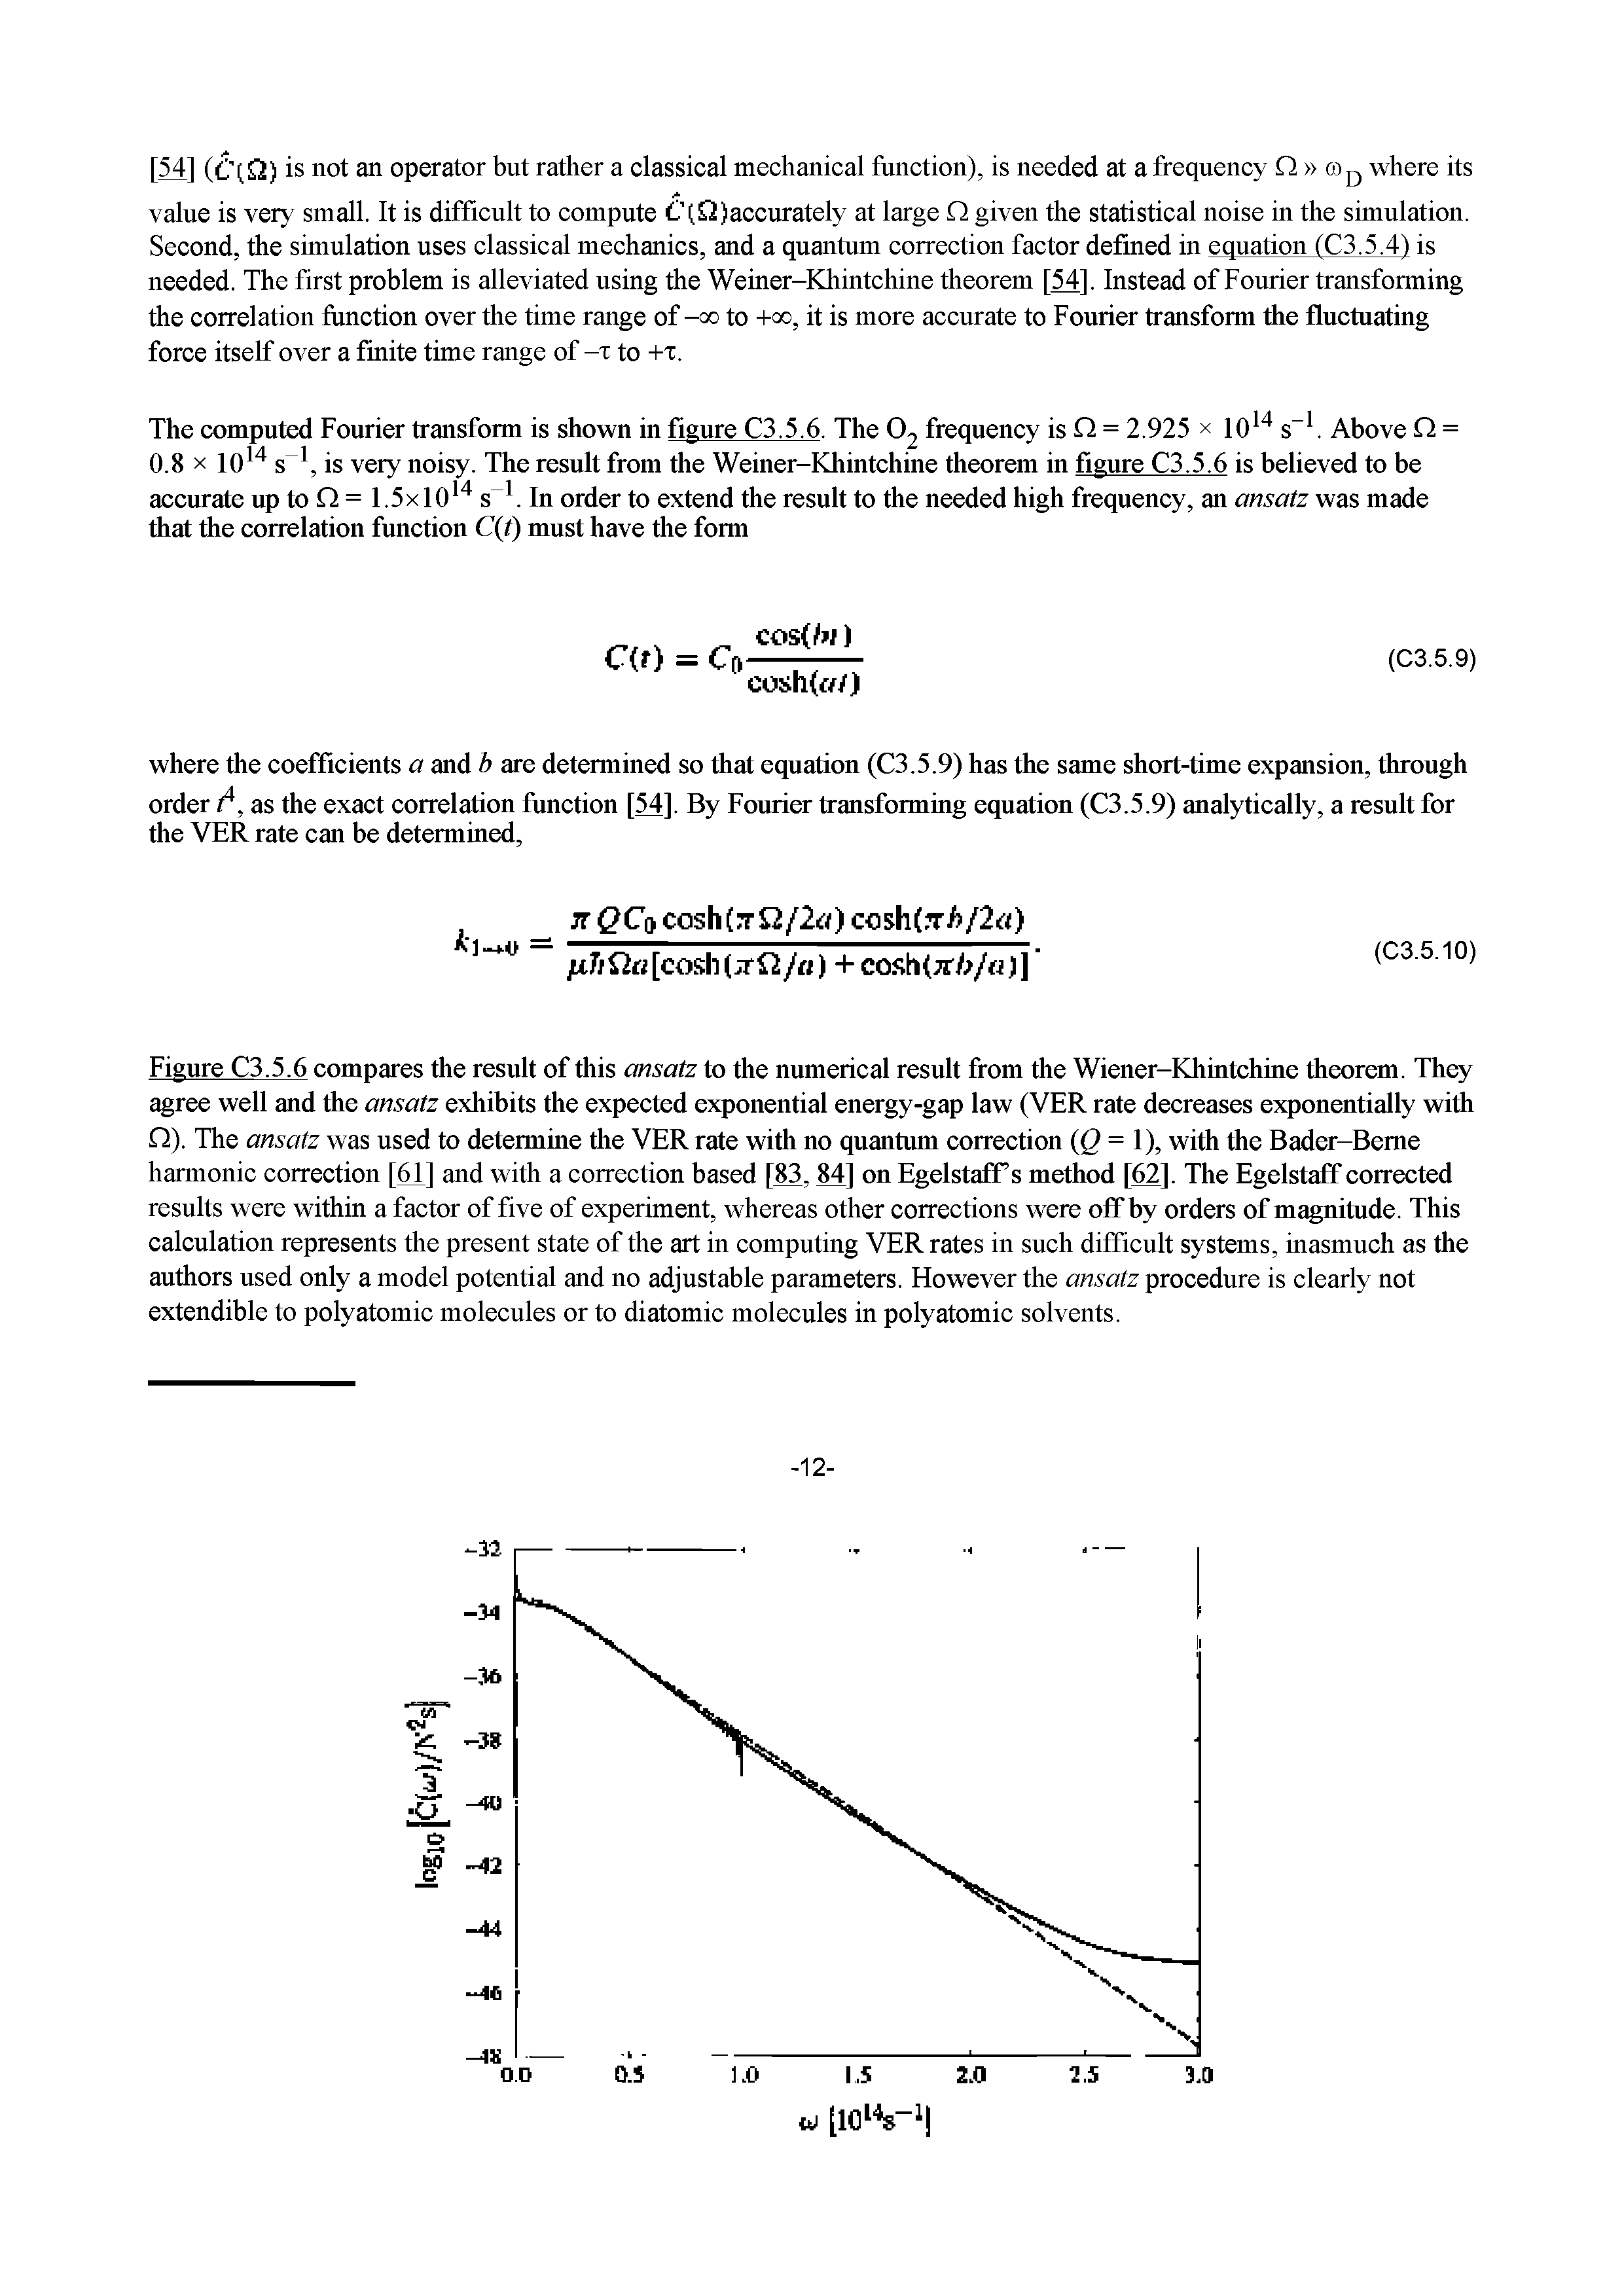 Figure C3.5.6 compares the result of this ansatz to the numerical result from the Wiener-Khintchine theorem. They agree well and the ansatz exhibits the expected exponential energy-gap law (VER rate decreases exponentially with Q). The ansatz was used to determine the VER rate with no quantum correction Q = 1), with the Bader-Beme harmonic correction [61] and with a correction based [M, M] on EgelstafPs method [62]. The Egelstaff corrected results were within a factor of five of experiment, whereas other eorrections were off by orders of magnitude. This ealeulation represents the present state of the art in computing VER rates in such difficult systems, inasmuch as the authors used only a model potential and no adjustable parameters. However the ansatz proeedure is clearly not extendible to polyatomic molecules or to diatomic molecules in polyatomic solvents.